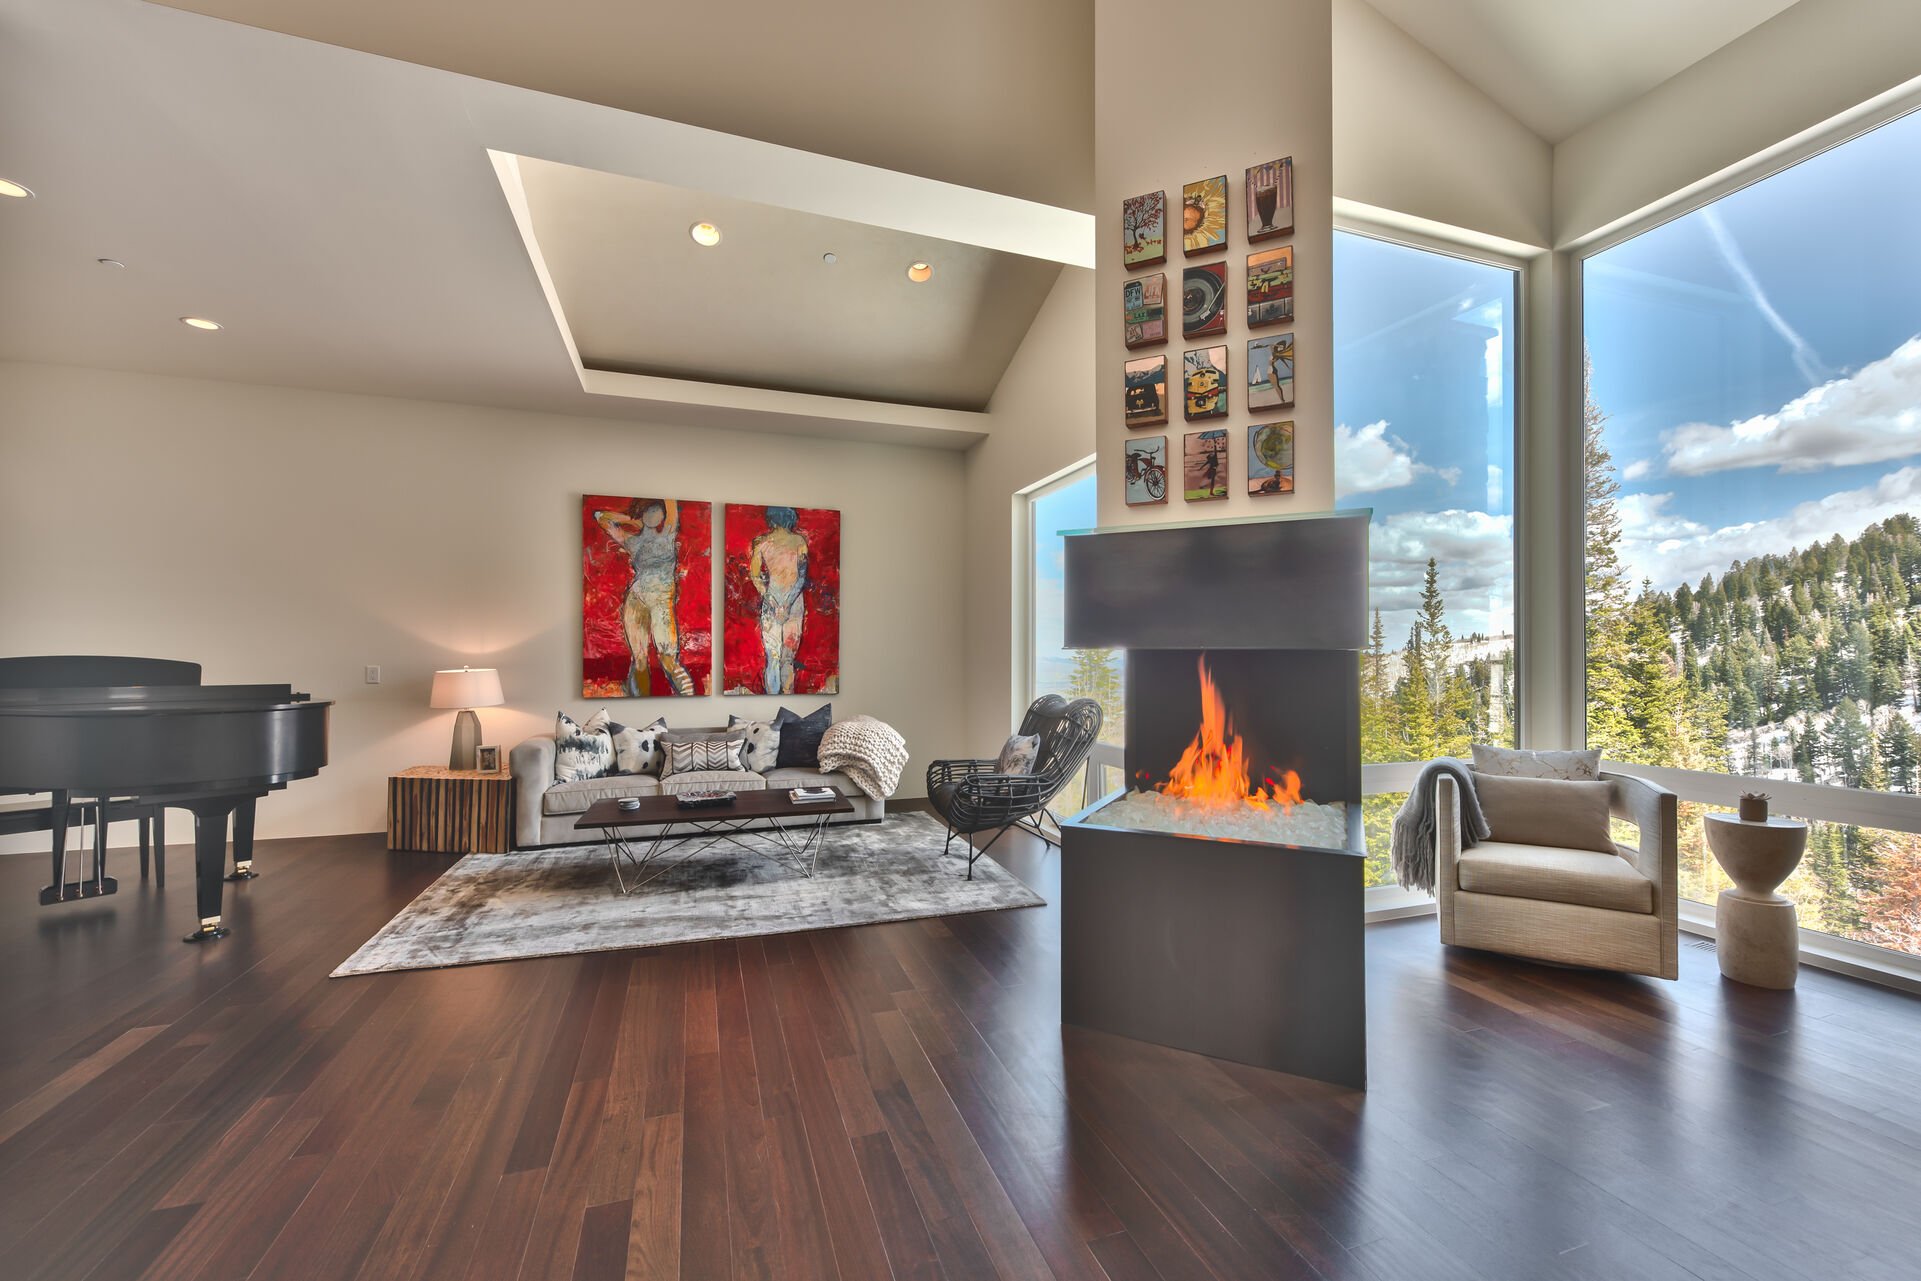 Music Room with a Baby Grand Piano in a Comfortable Space with a Gas Fireplace and Mountain Views